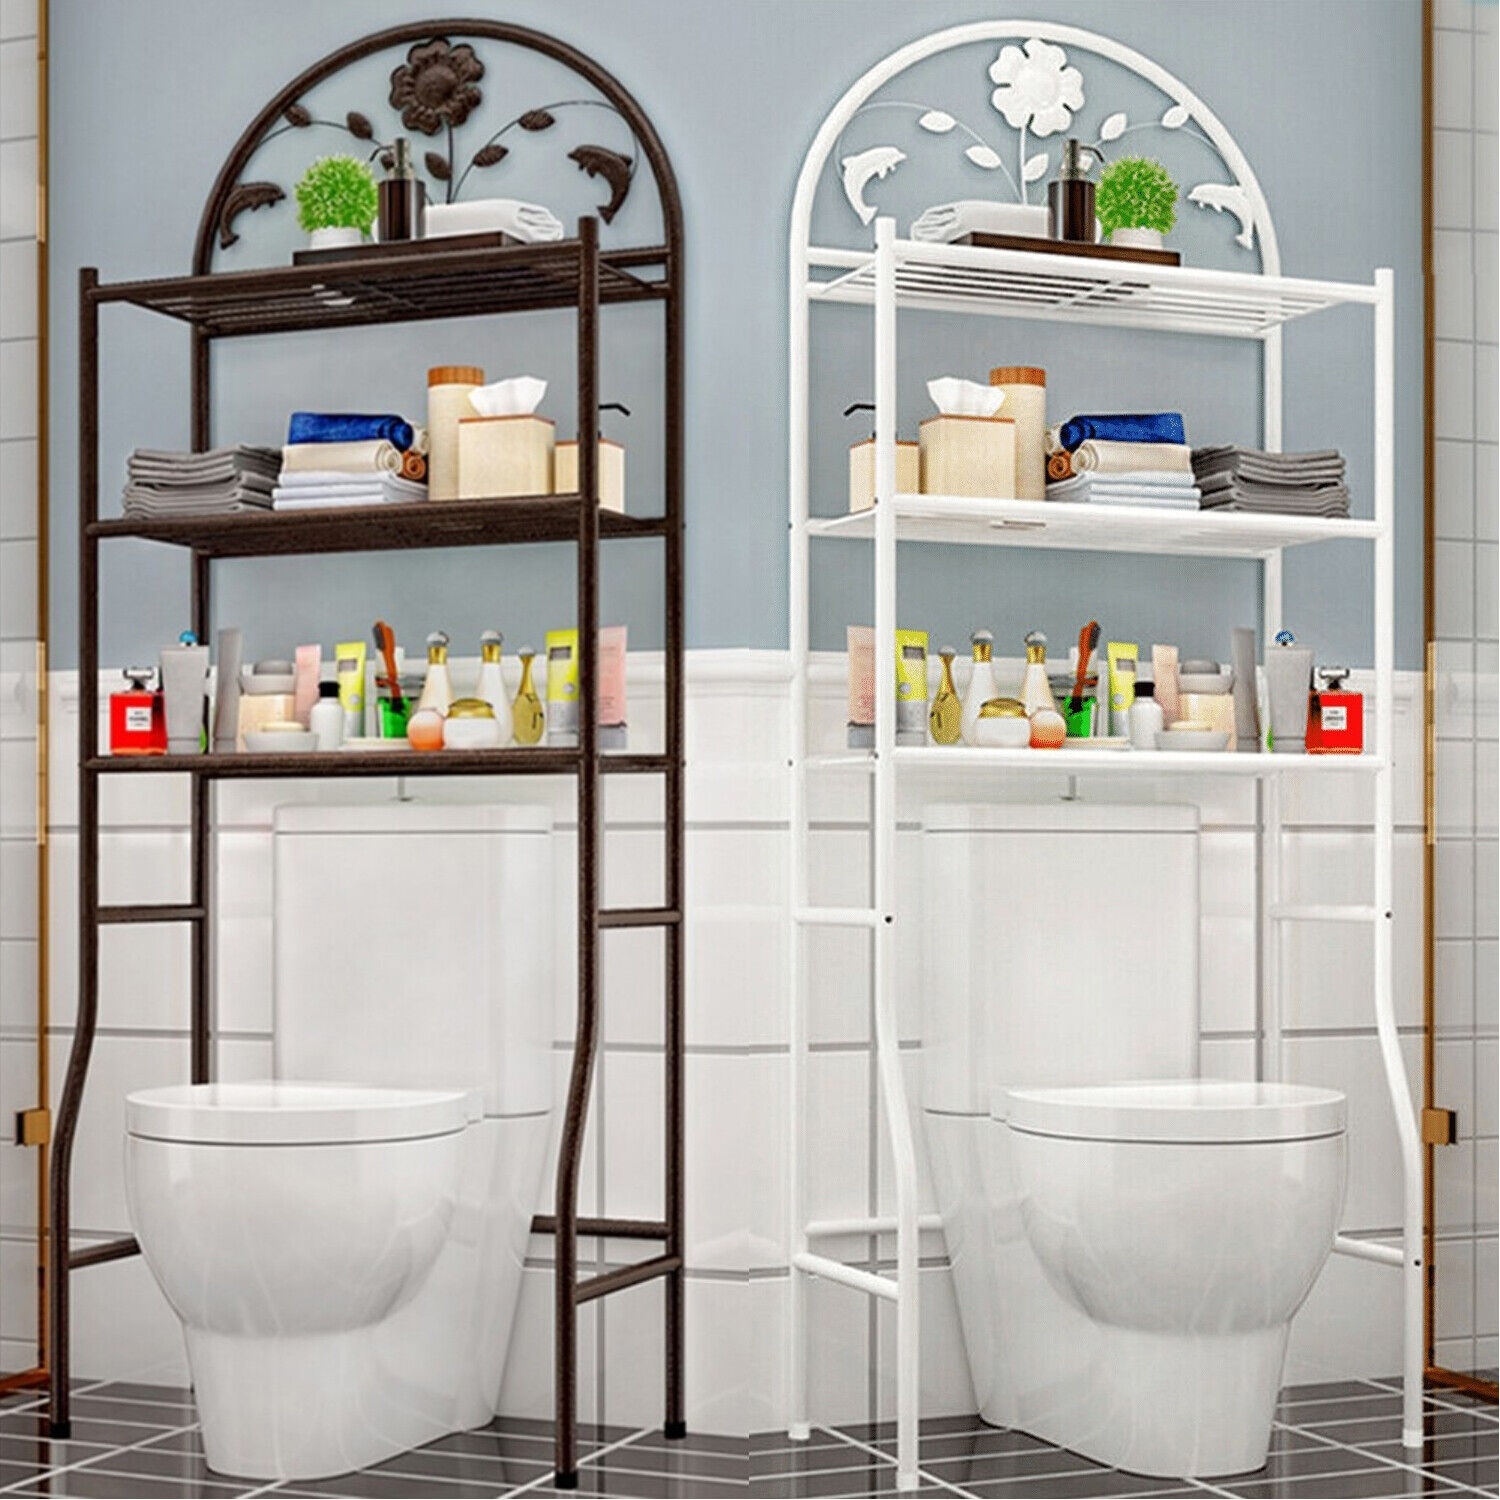 https://ak1.ostkcdn.com/images/products/is/images/direct/17269e1bf85164a7456699bc14a05985b8c0c7d2/Free-Standing-3-Tier-Over-Toilet-Storage-Rack-Bathroom-Shelves.jpg